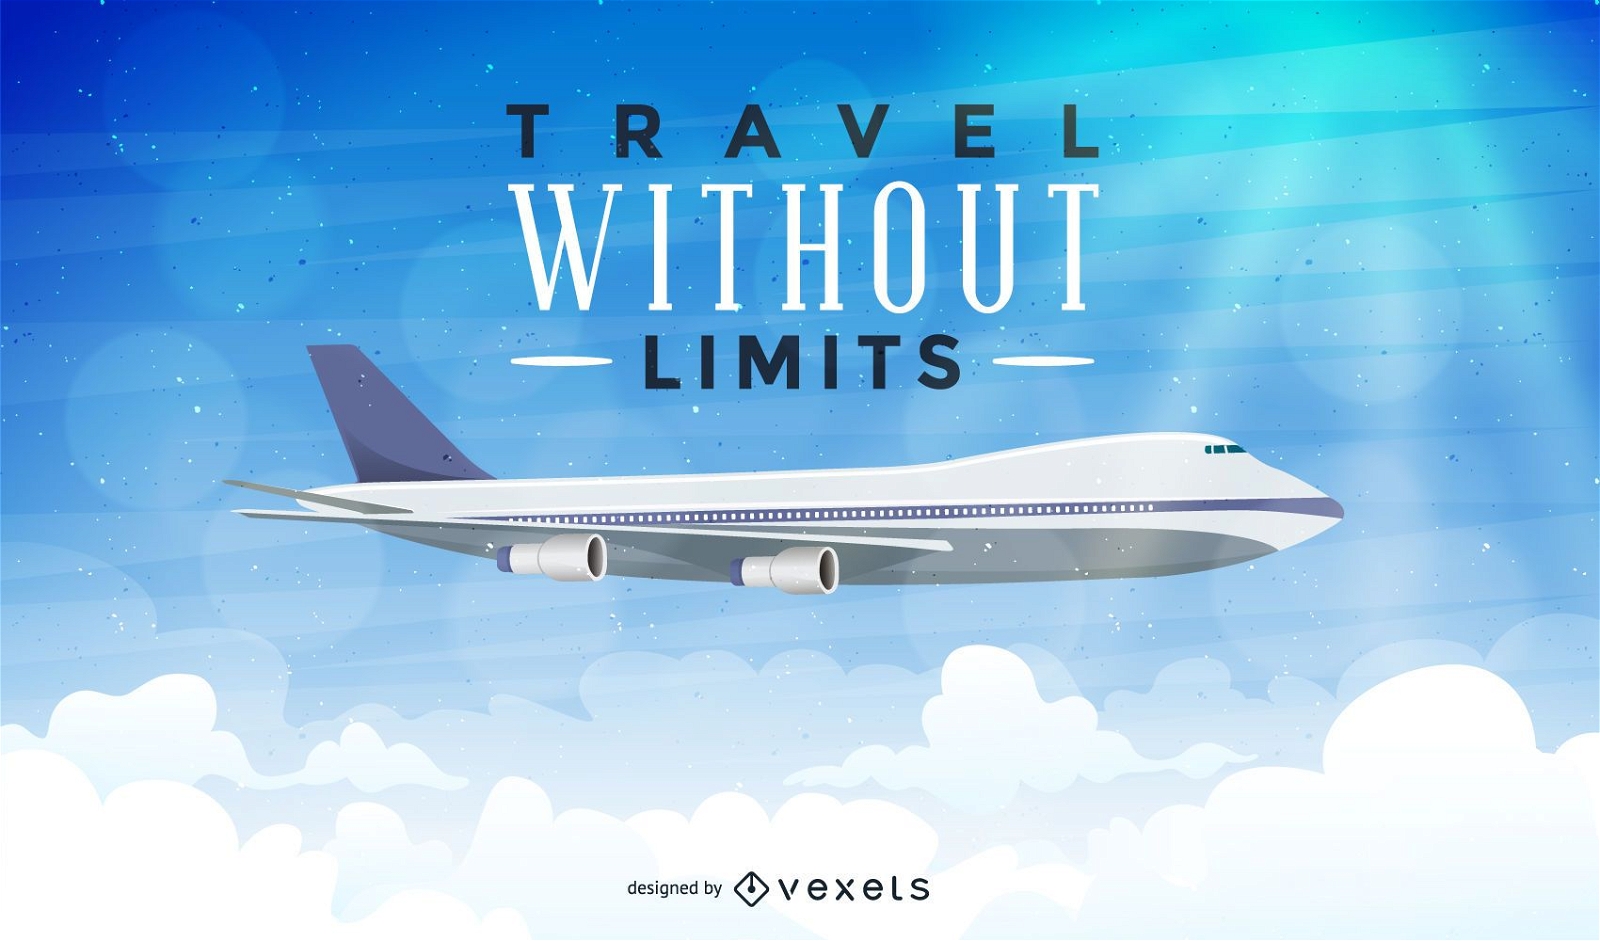 Airplane travel illustration with text